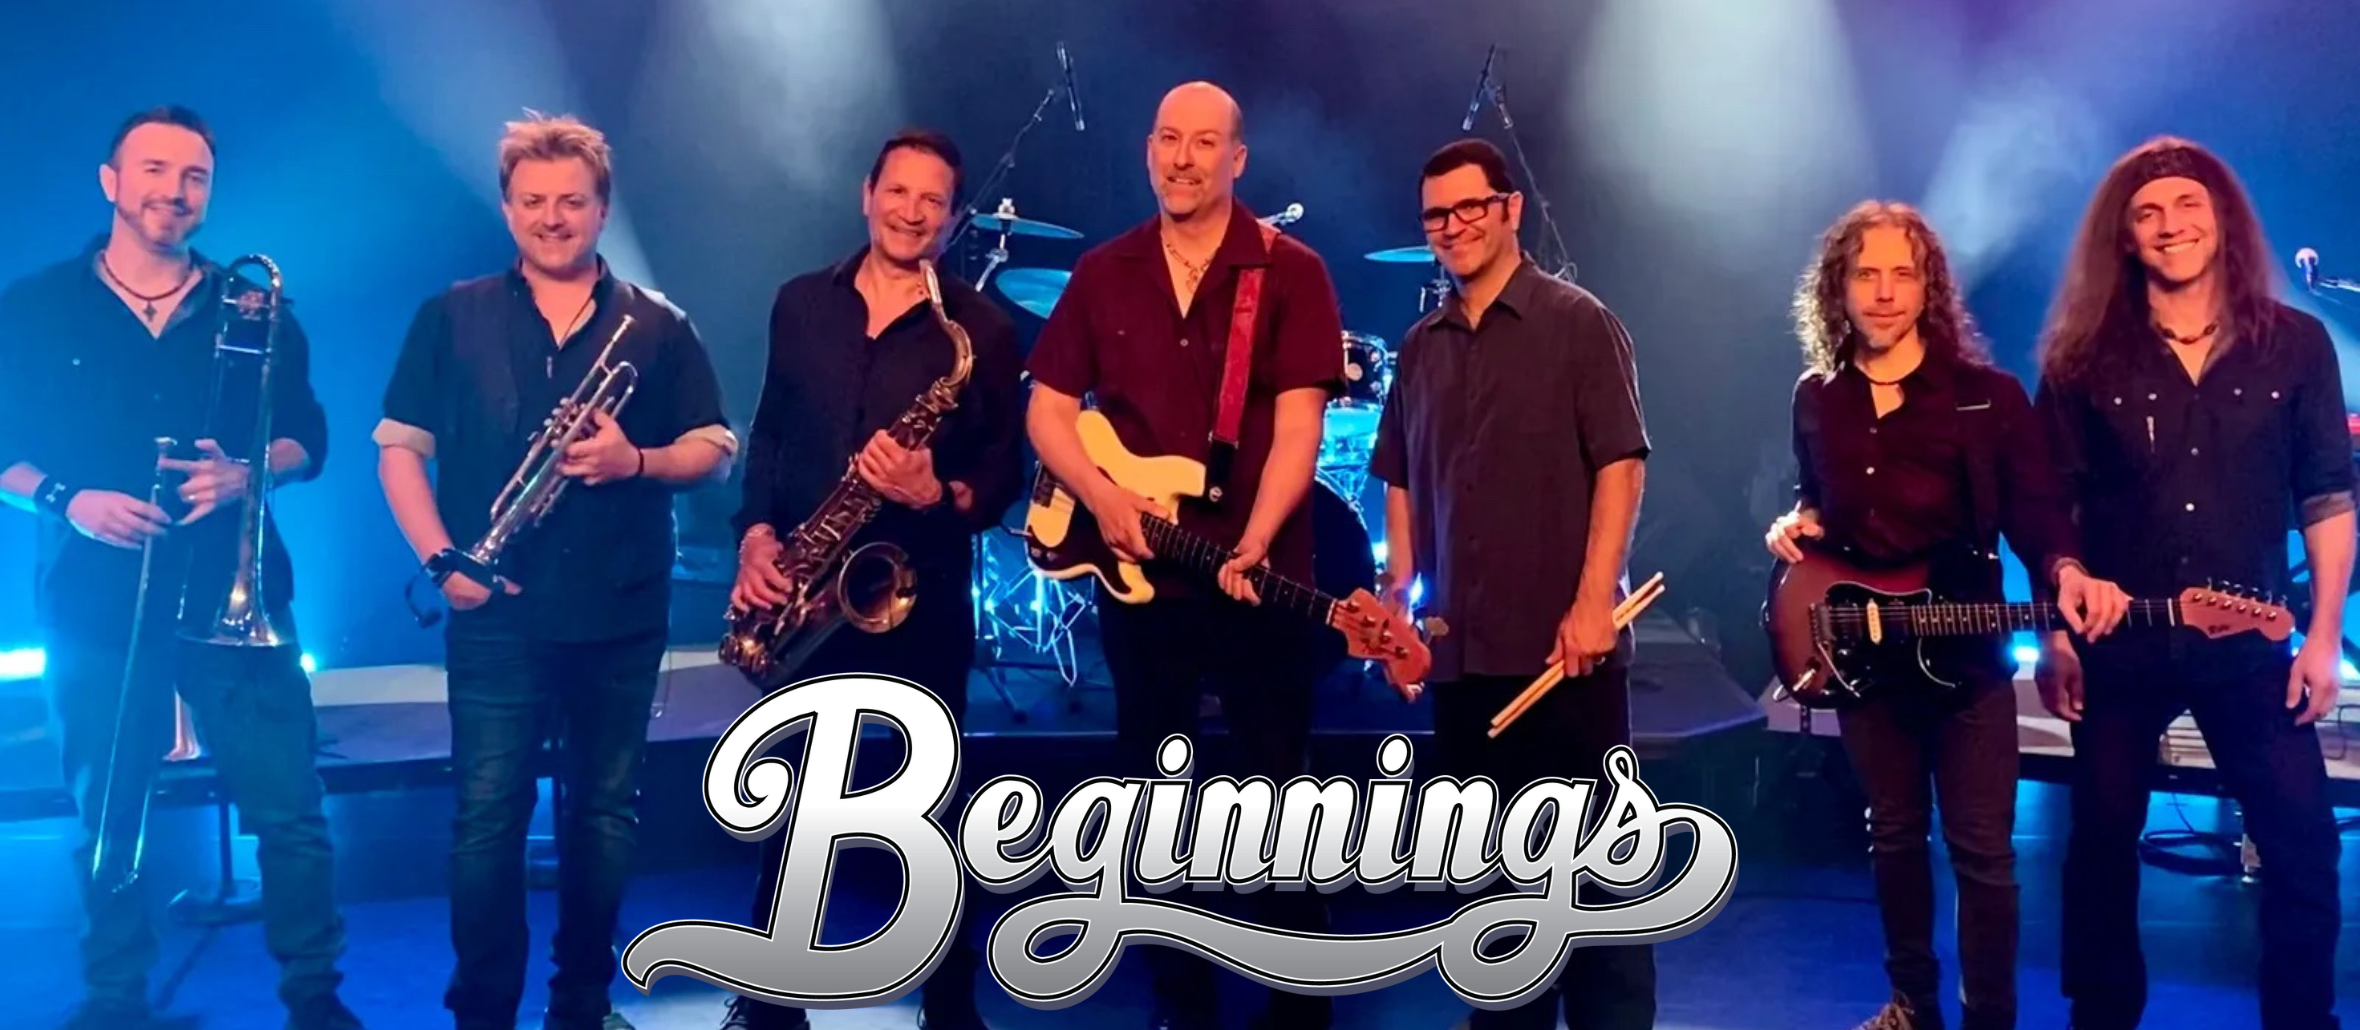 Beginnings: The Ultimate Chicago Tribute Band